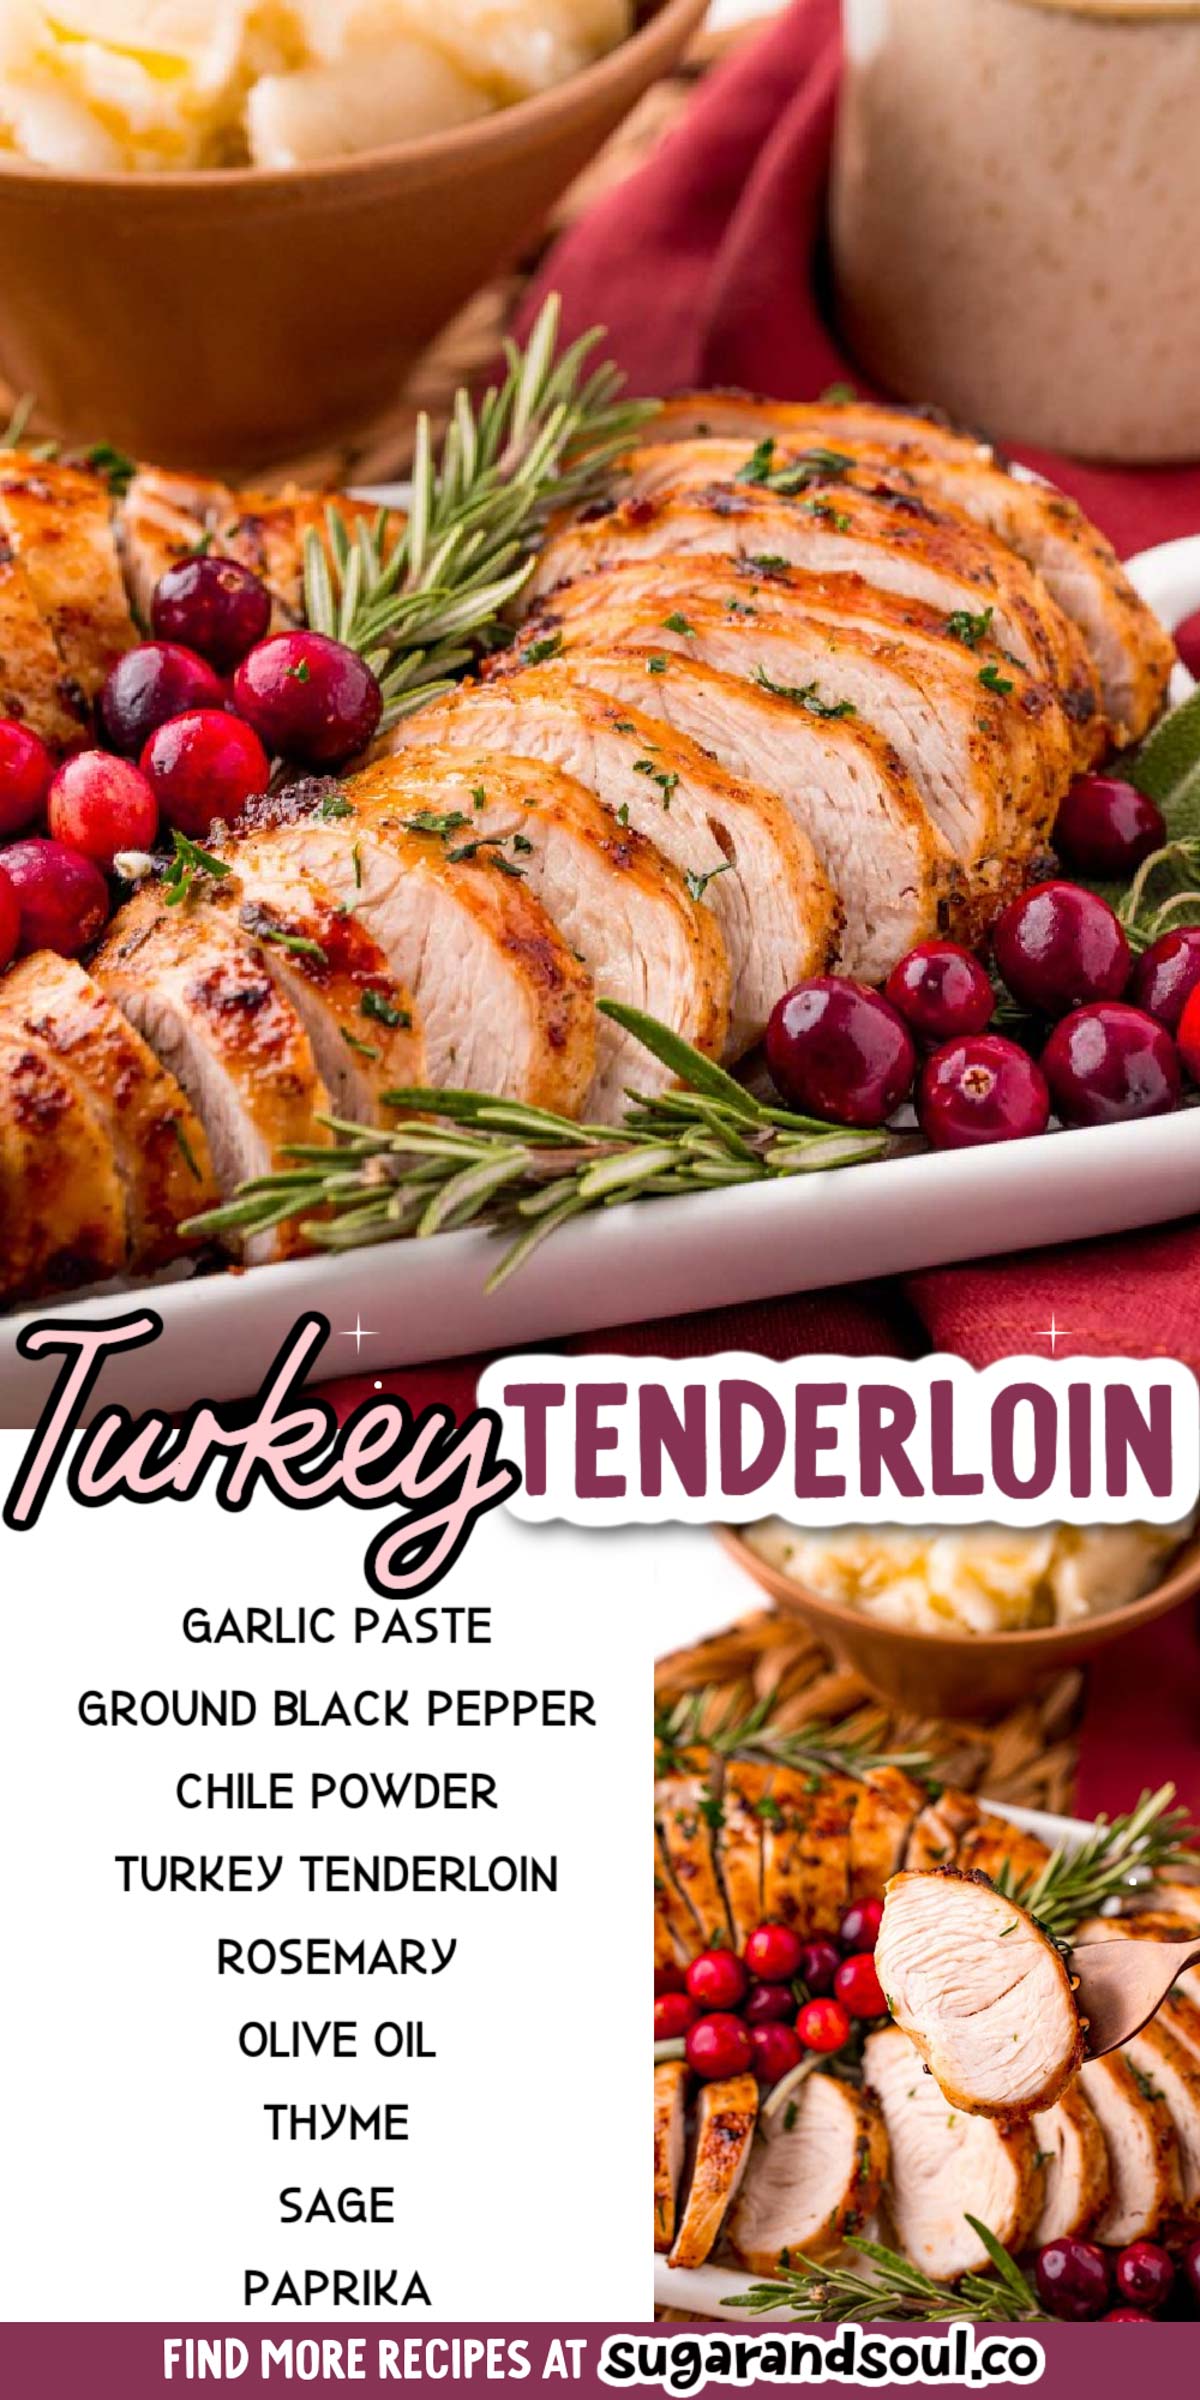 This Turkey Tenderloin is rubbed with olive oil, garlic, spices, and herbs before cooking up to juicy, tender perfection in the Air Fryer! Cooks in only 45 minutes, making it a great option for Thanksgiving or even just an easy weeknight meal! via @sugarandsoulco